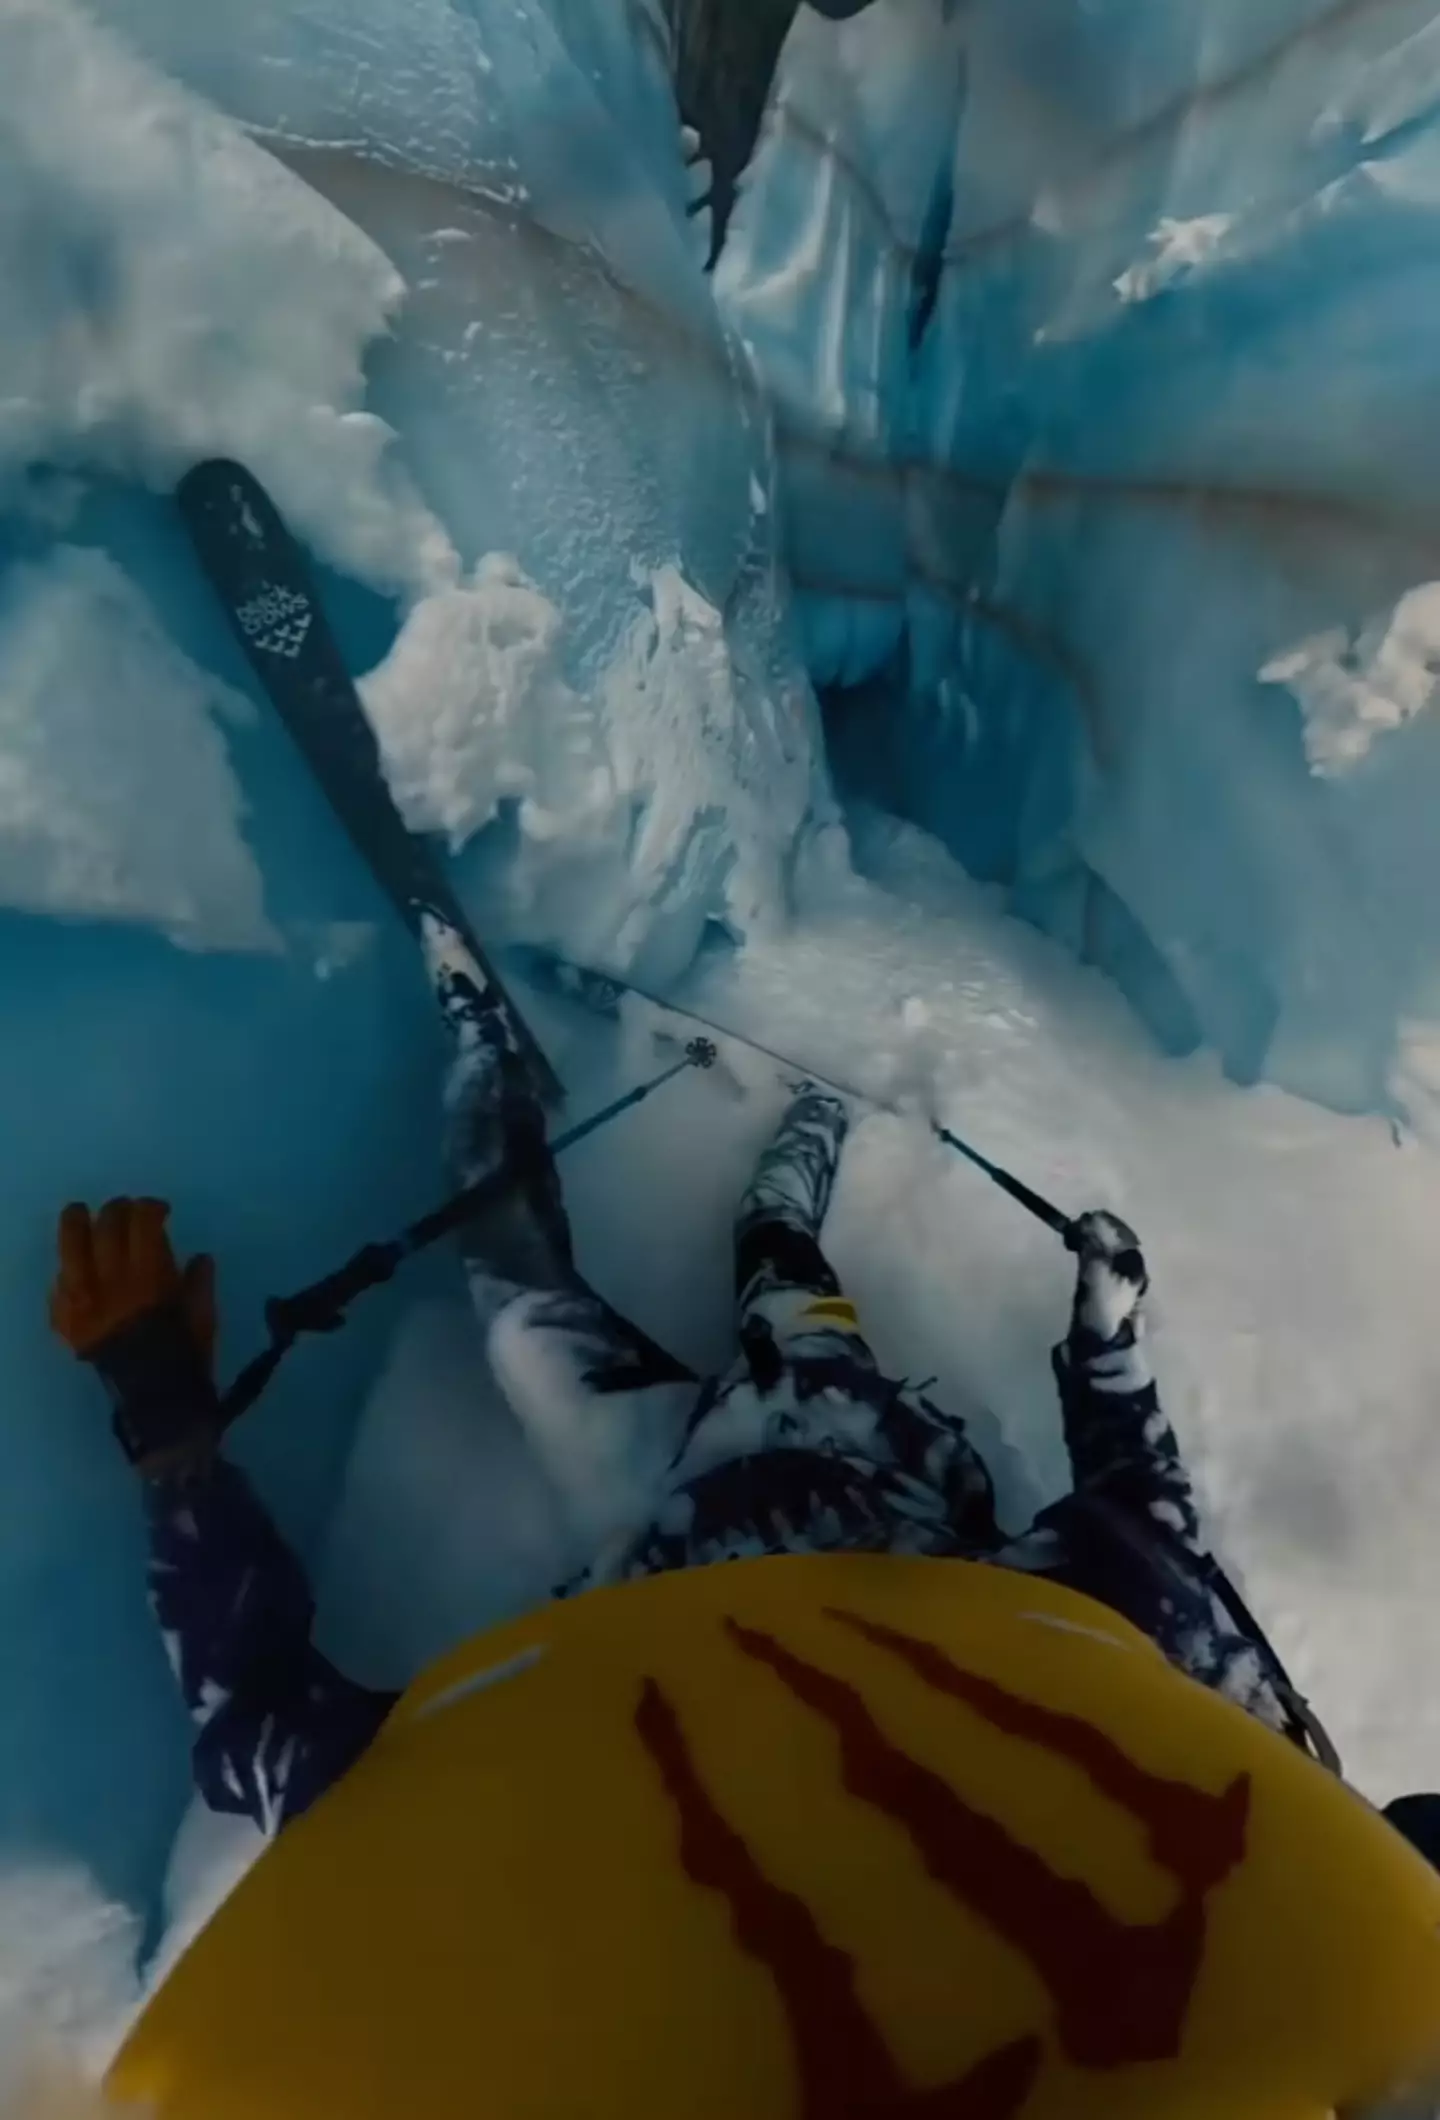 Thankfully, the skier managed to find their feet on a ledge.